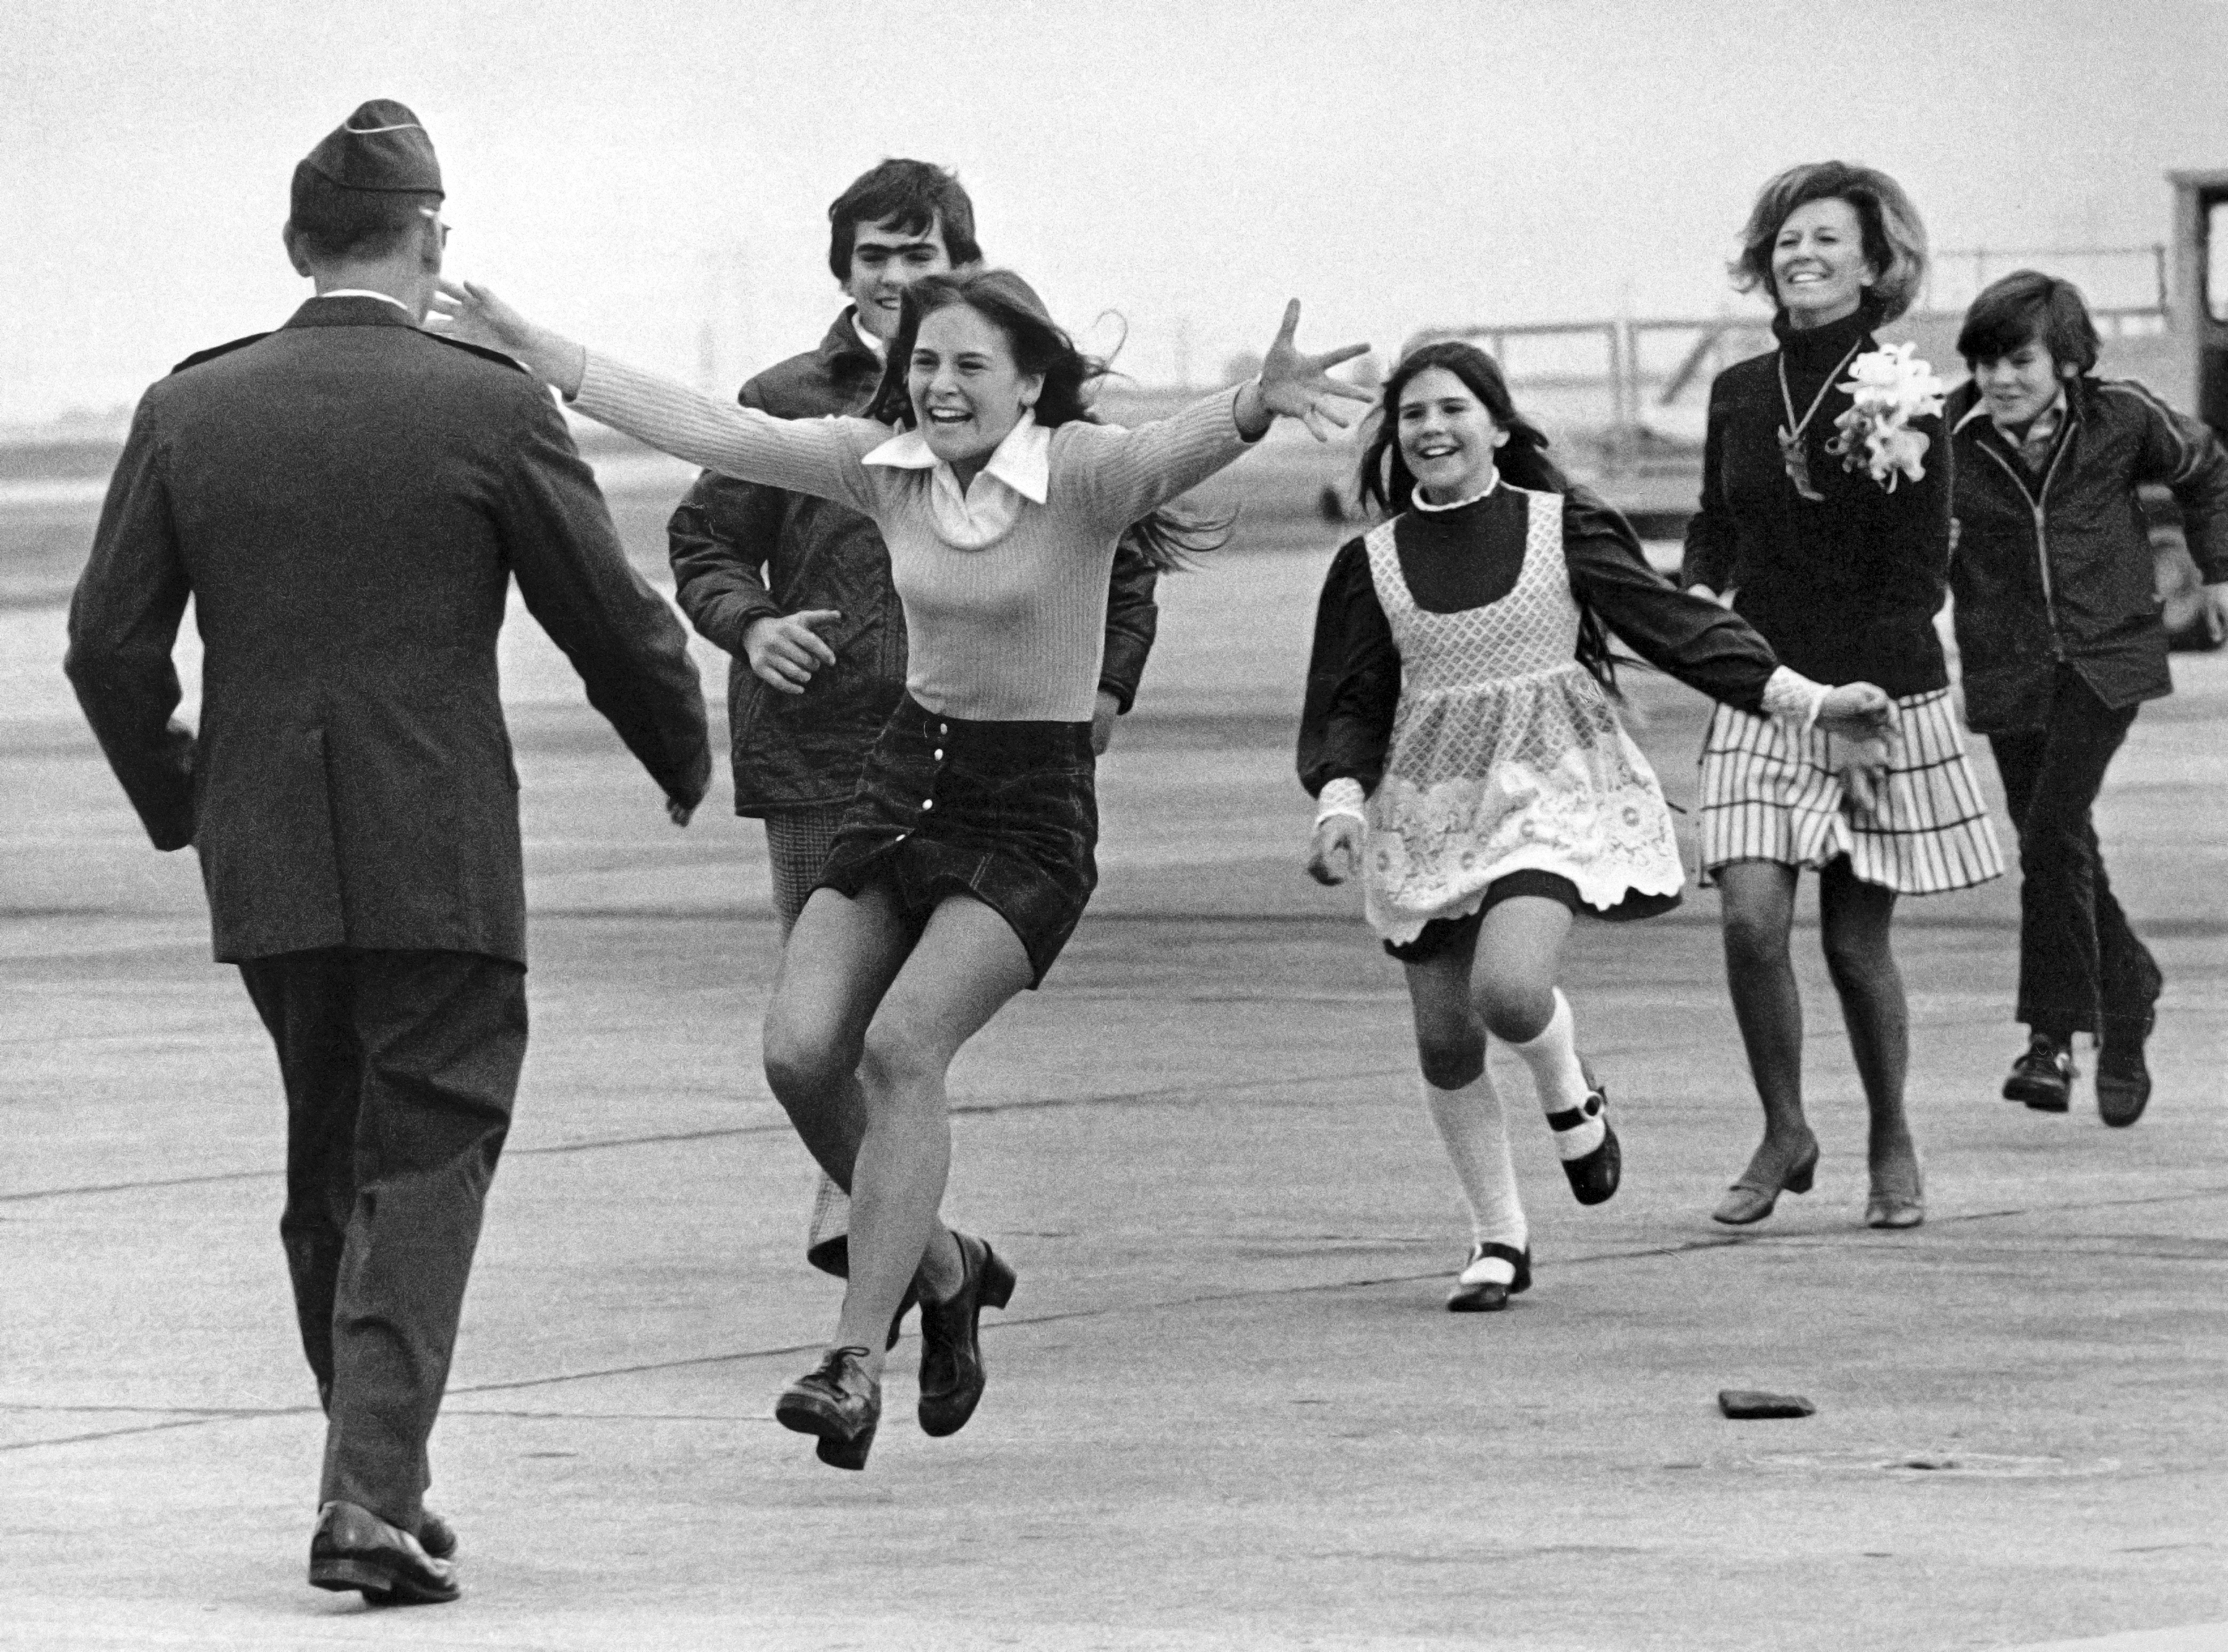 Released prisoner of war Lt. Col. Robert L. Stirm is greeted by his family at Travis Air Force Base in Fairfield, Calif., as he returns home from the Vietnam War, March 17, 1973. Leading is Stirm's daughter Lori, 15, followed by son Robert, 14; daughter Cynthia, 11; wife Loretta and son Roger, 12. Stirm was held more than five years after his plane was shot down over North Vietnam in 1968. (AP Photo/Sal Veder)